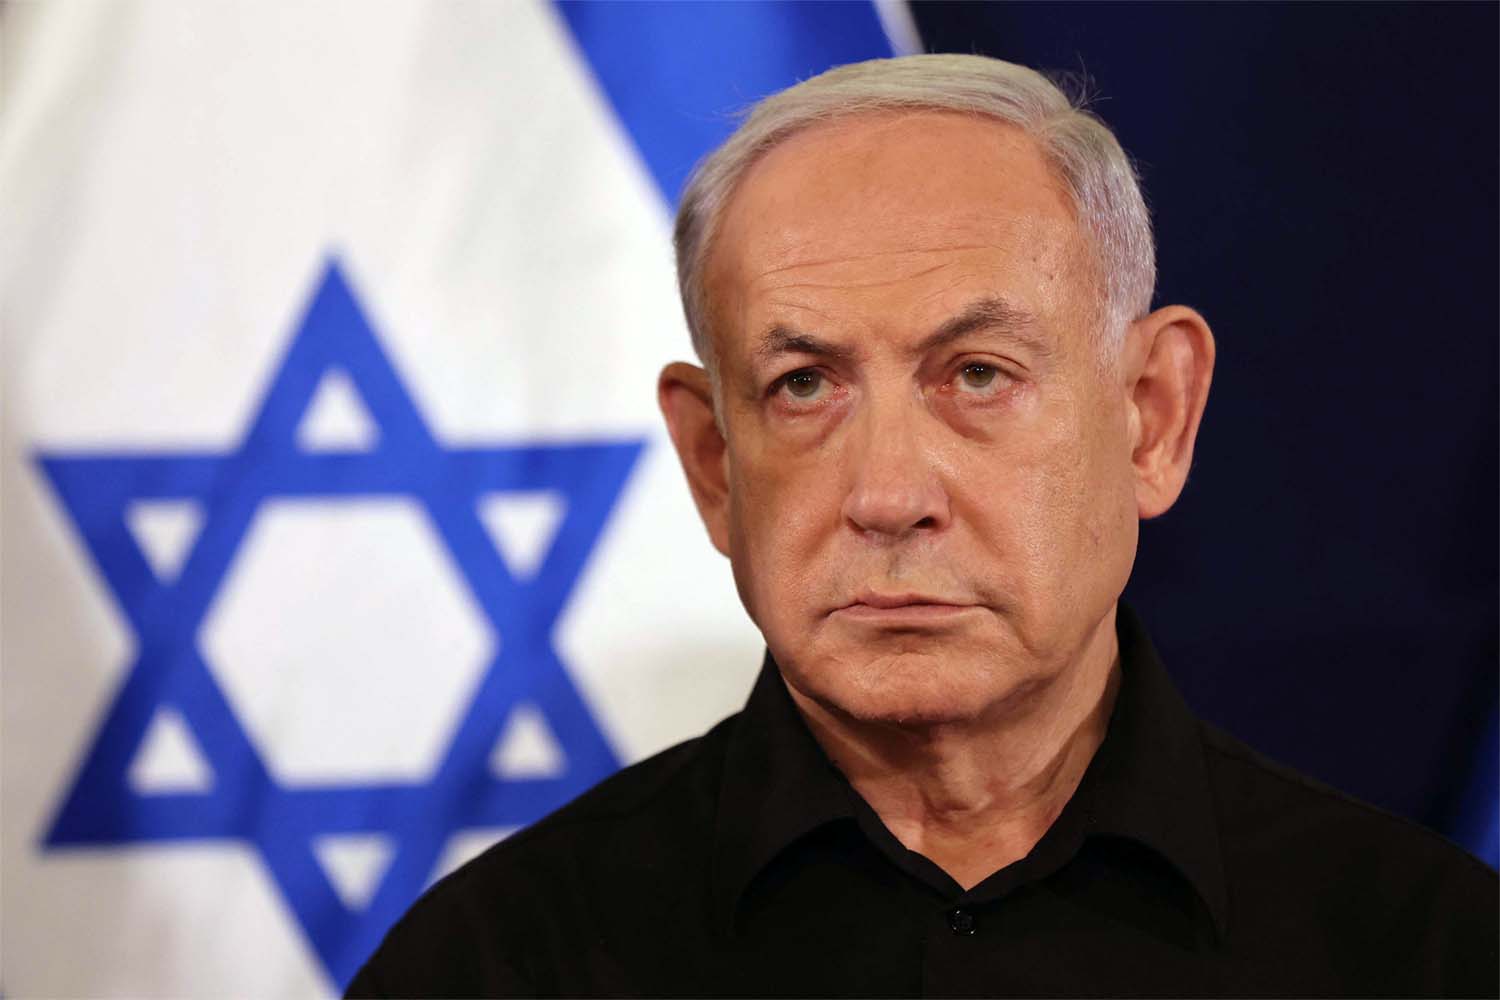 Are Netanyahu's days in office numbered after the intel failure?